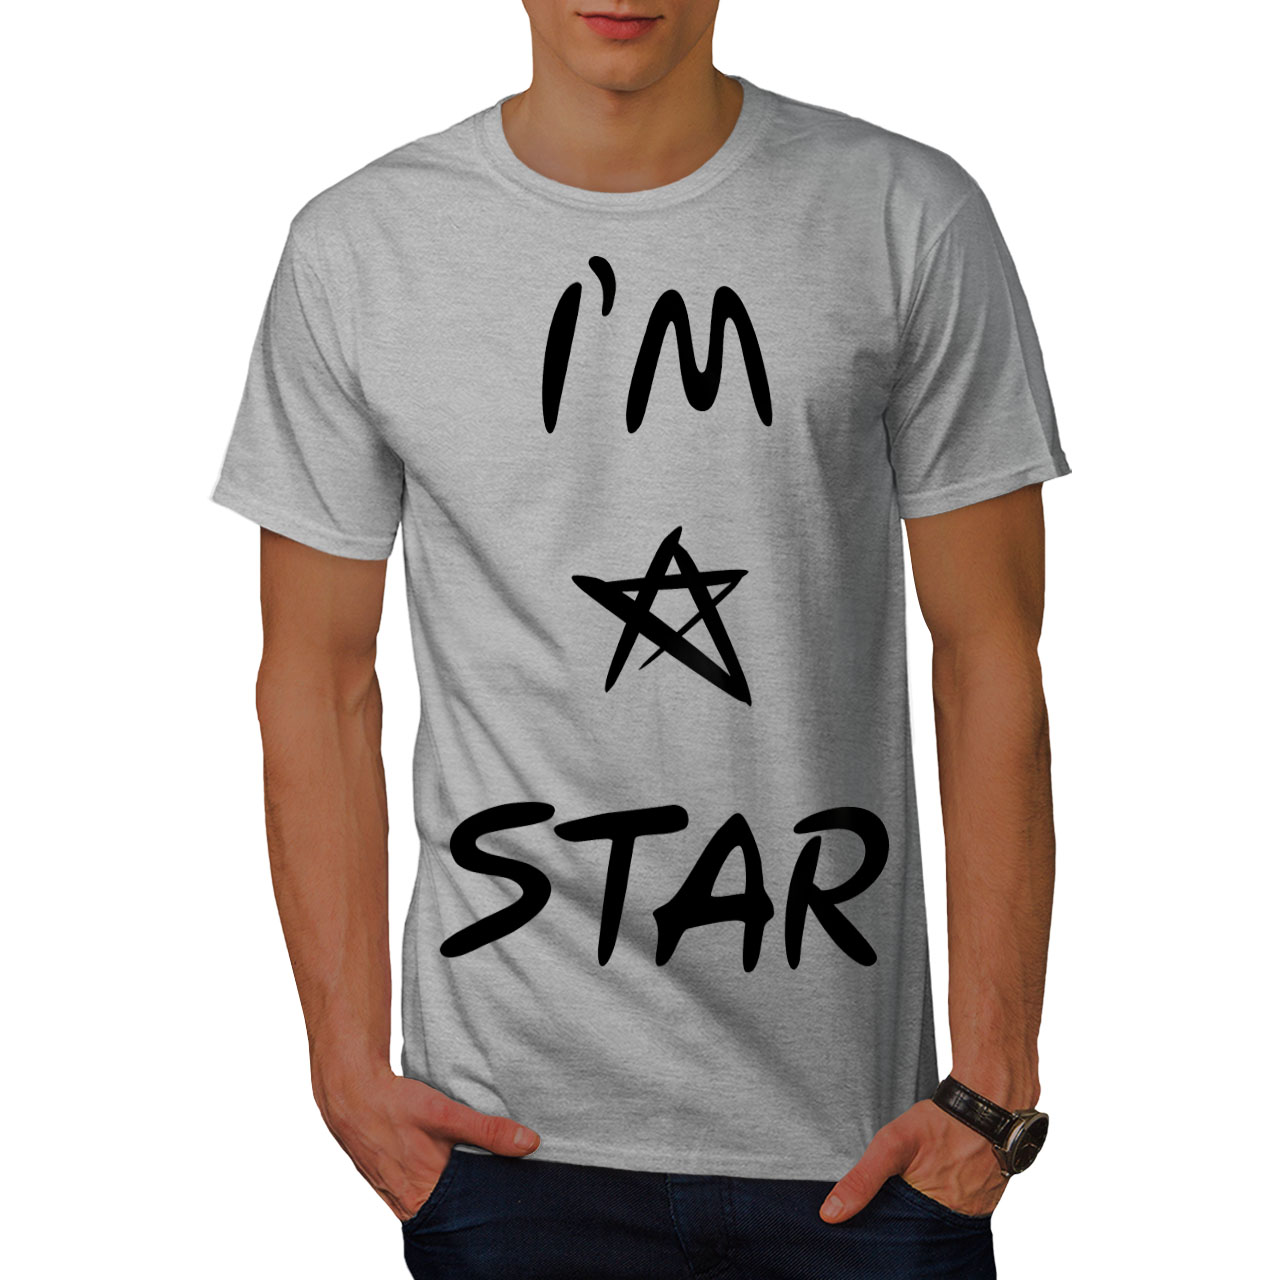 Wellcoda I am a Star Cool Mens T-shirt, Famous Graphic Design Printed ...